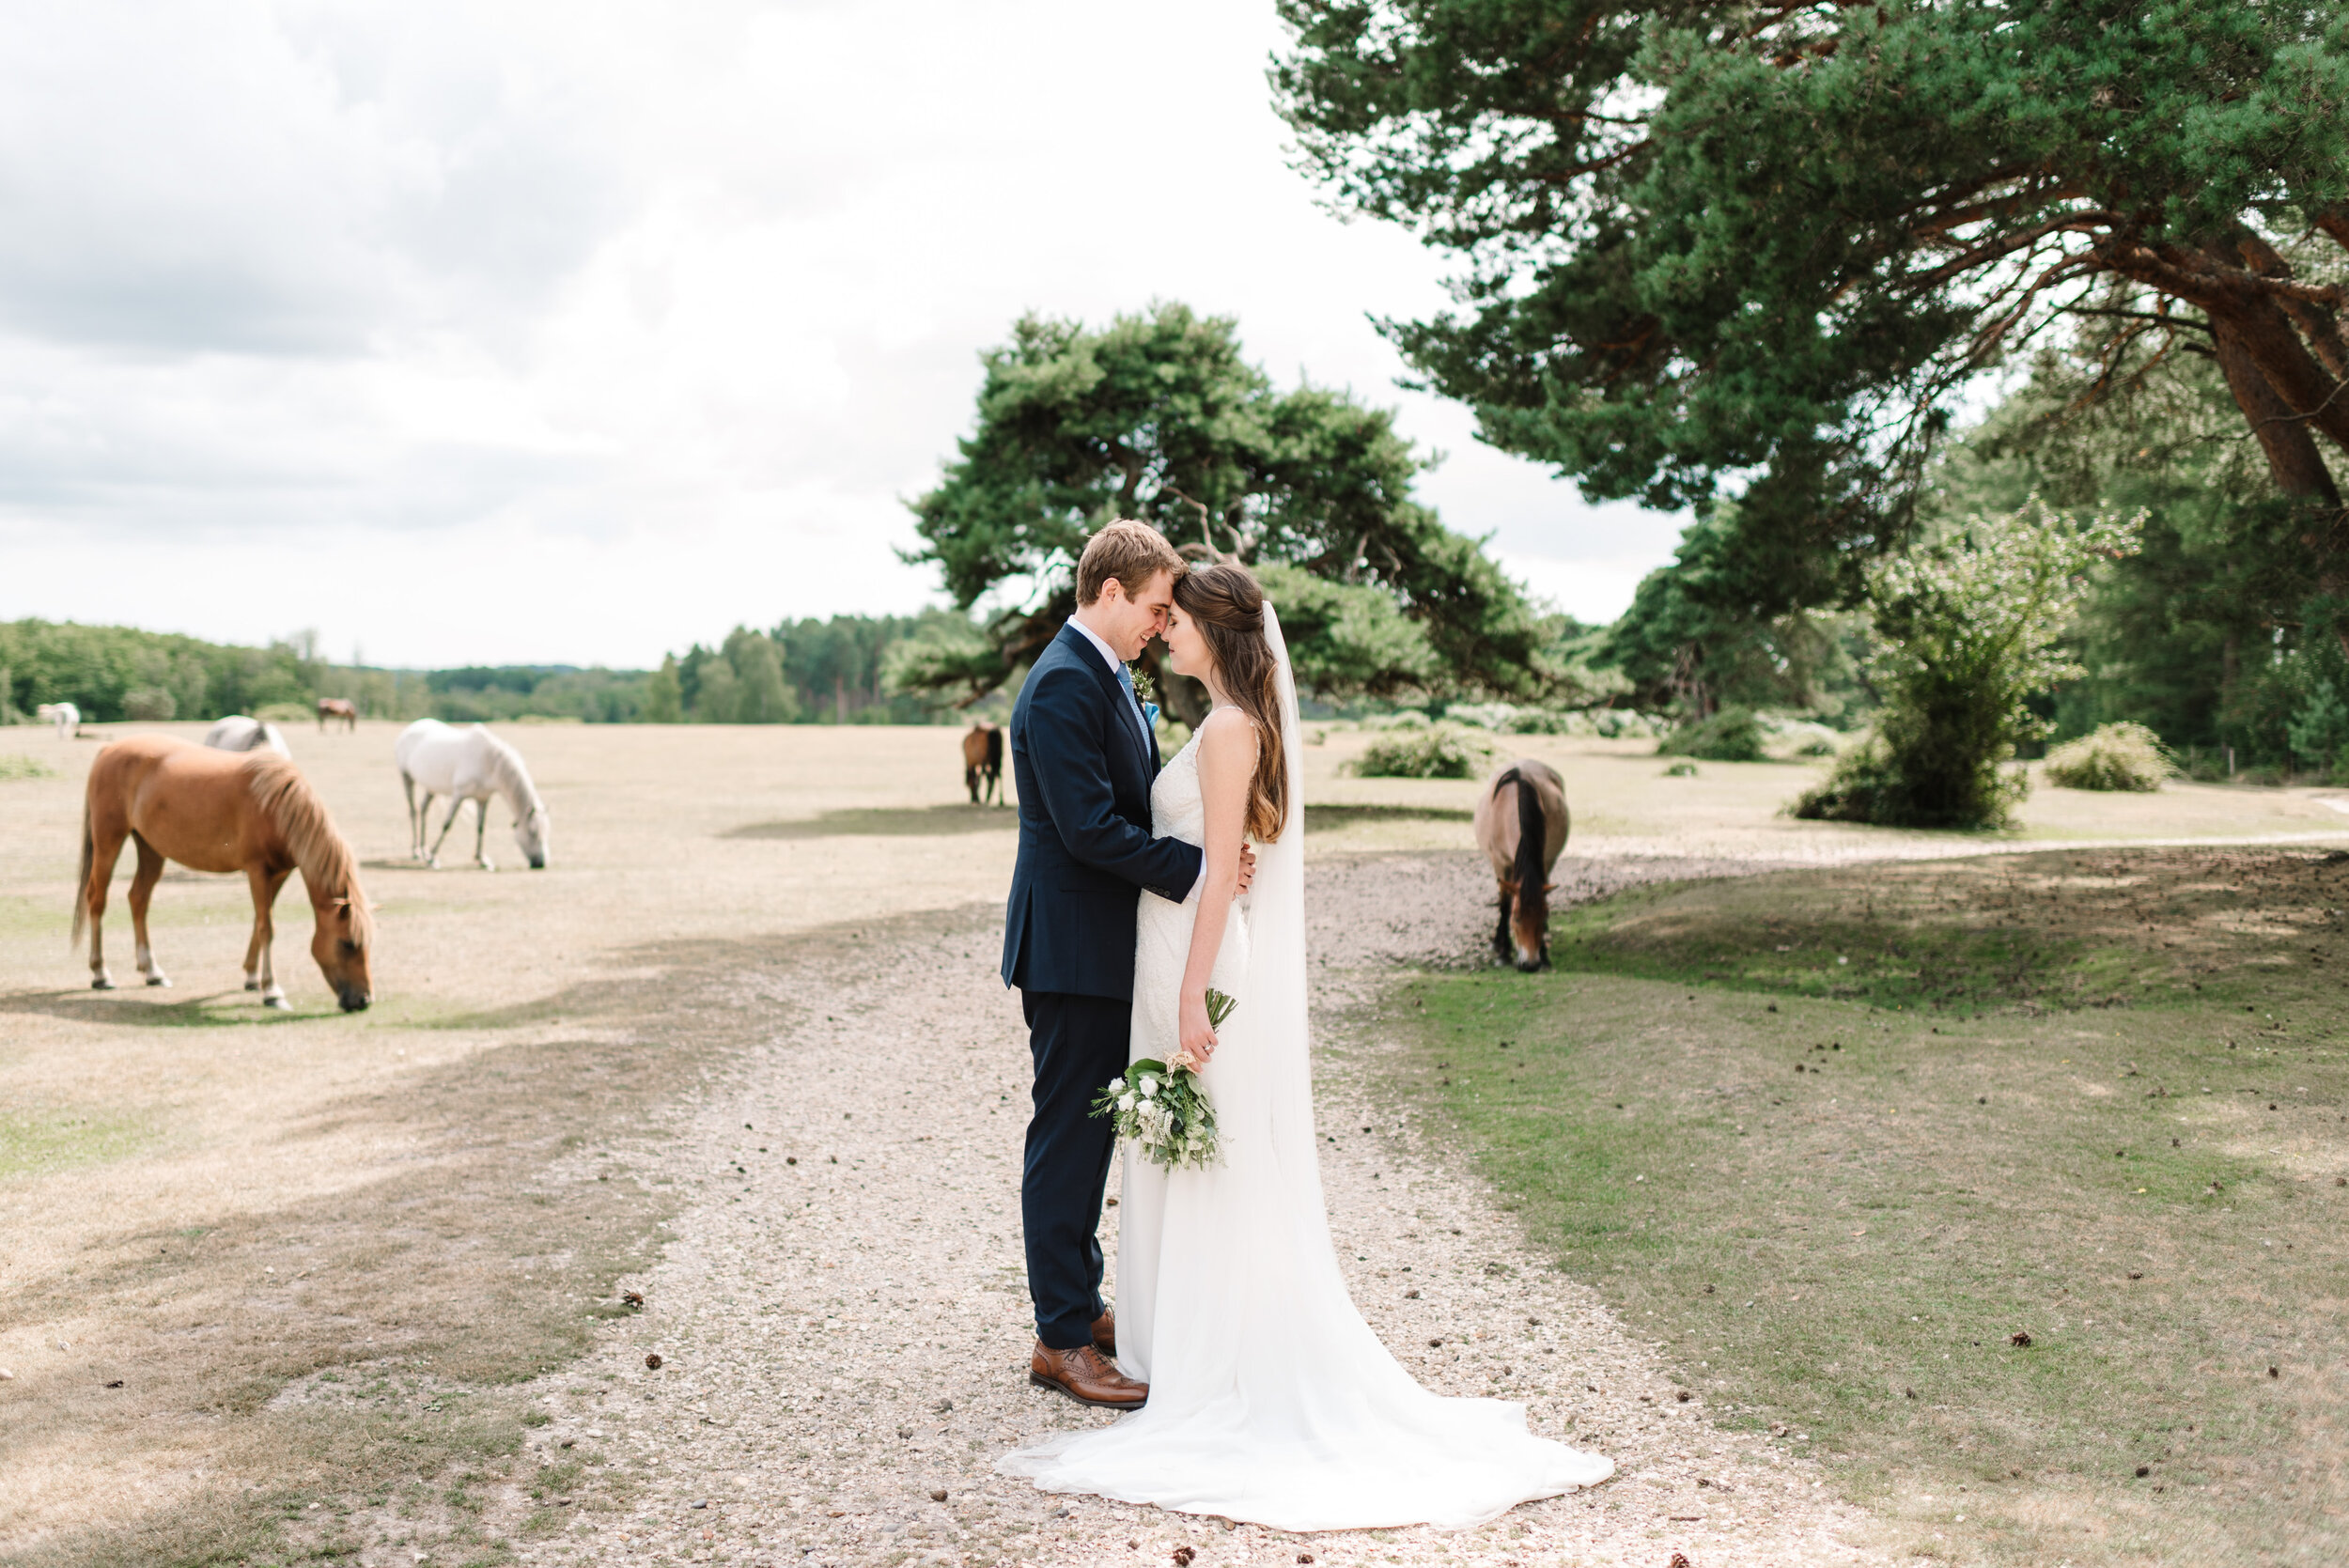 Bride and groom facing each other surrounded by New Forest horses